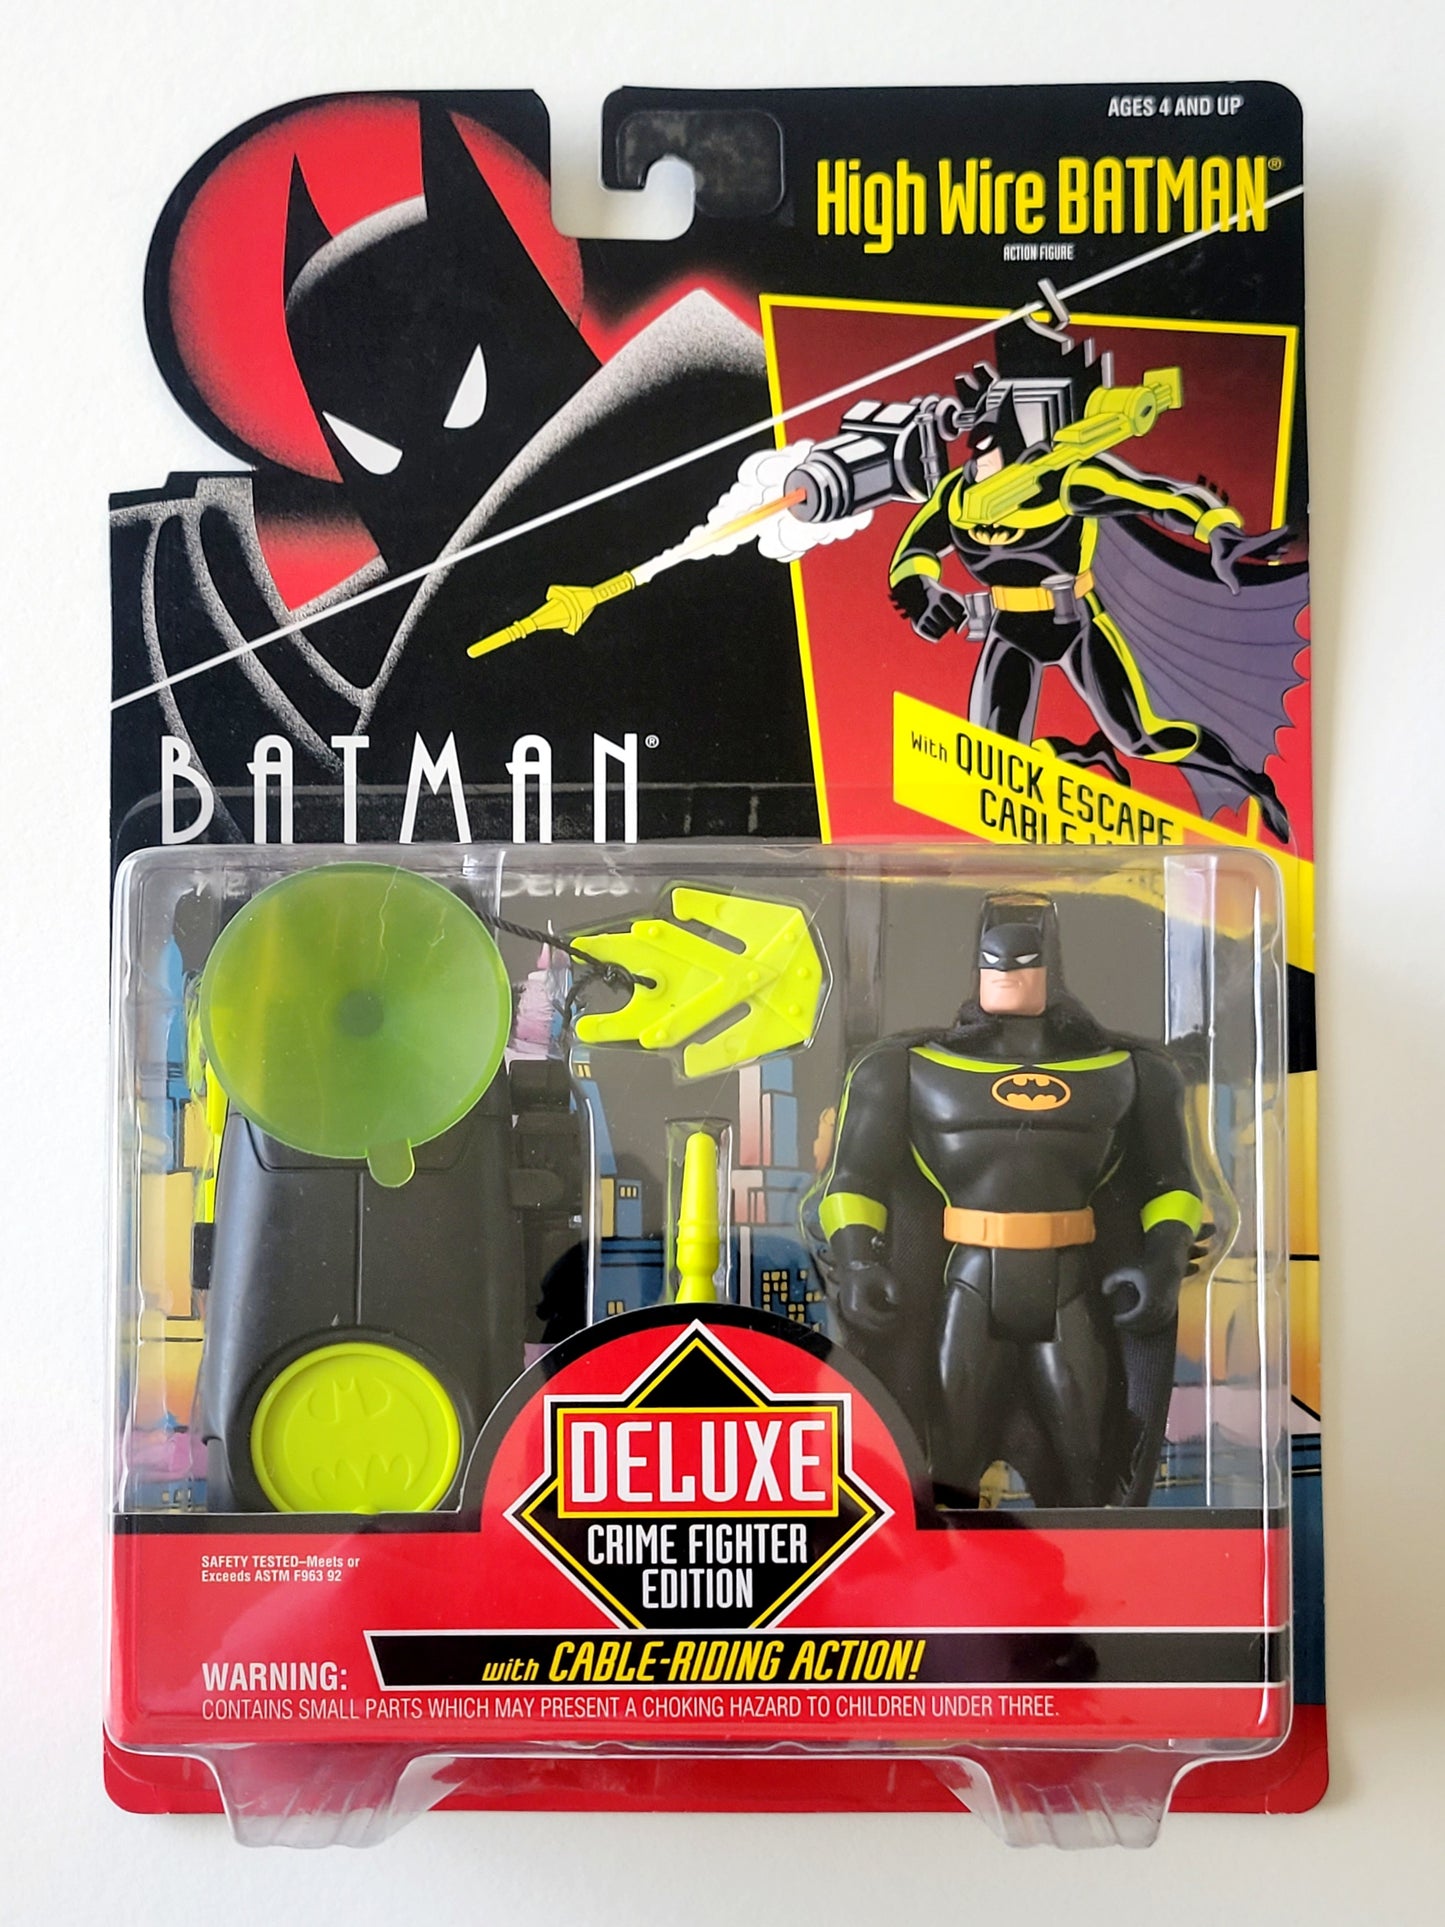 Deluxe Crime Fighter Edition High Wire Batman Action Figure from Batman: The Animated Series